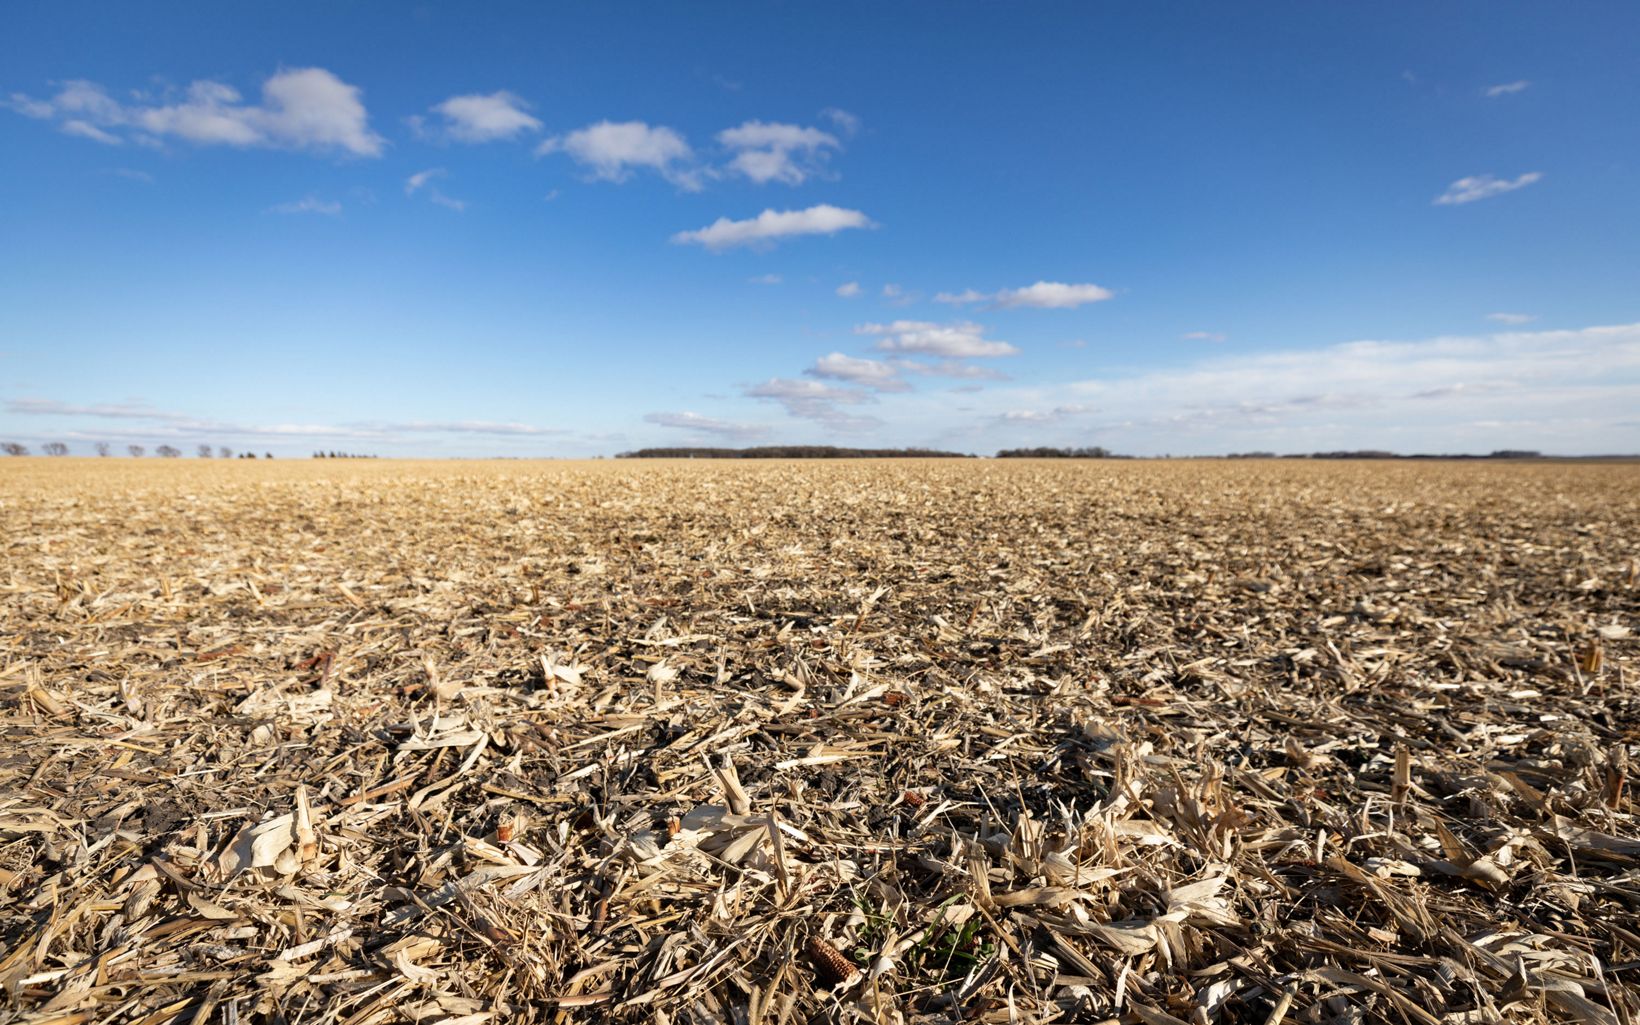 an undisturbed, post-harvest farm field covered with crop residue including corn stalks and cobs.